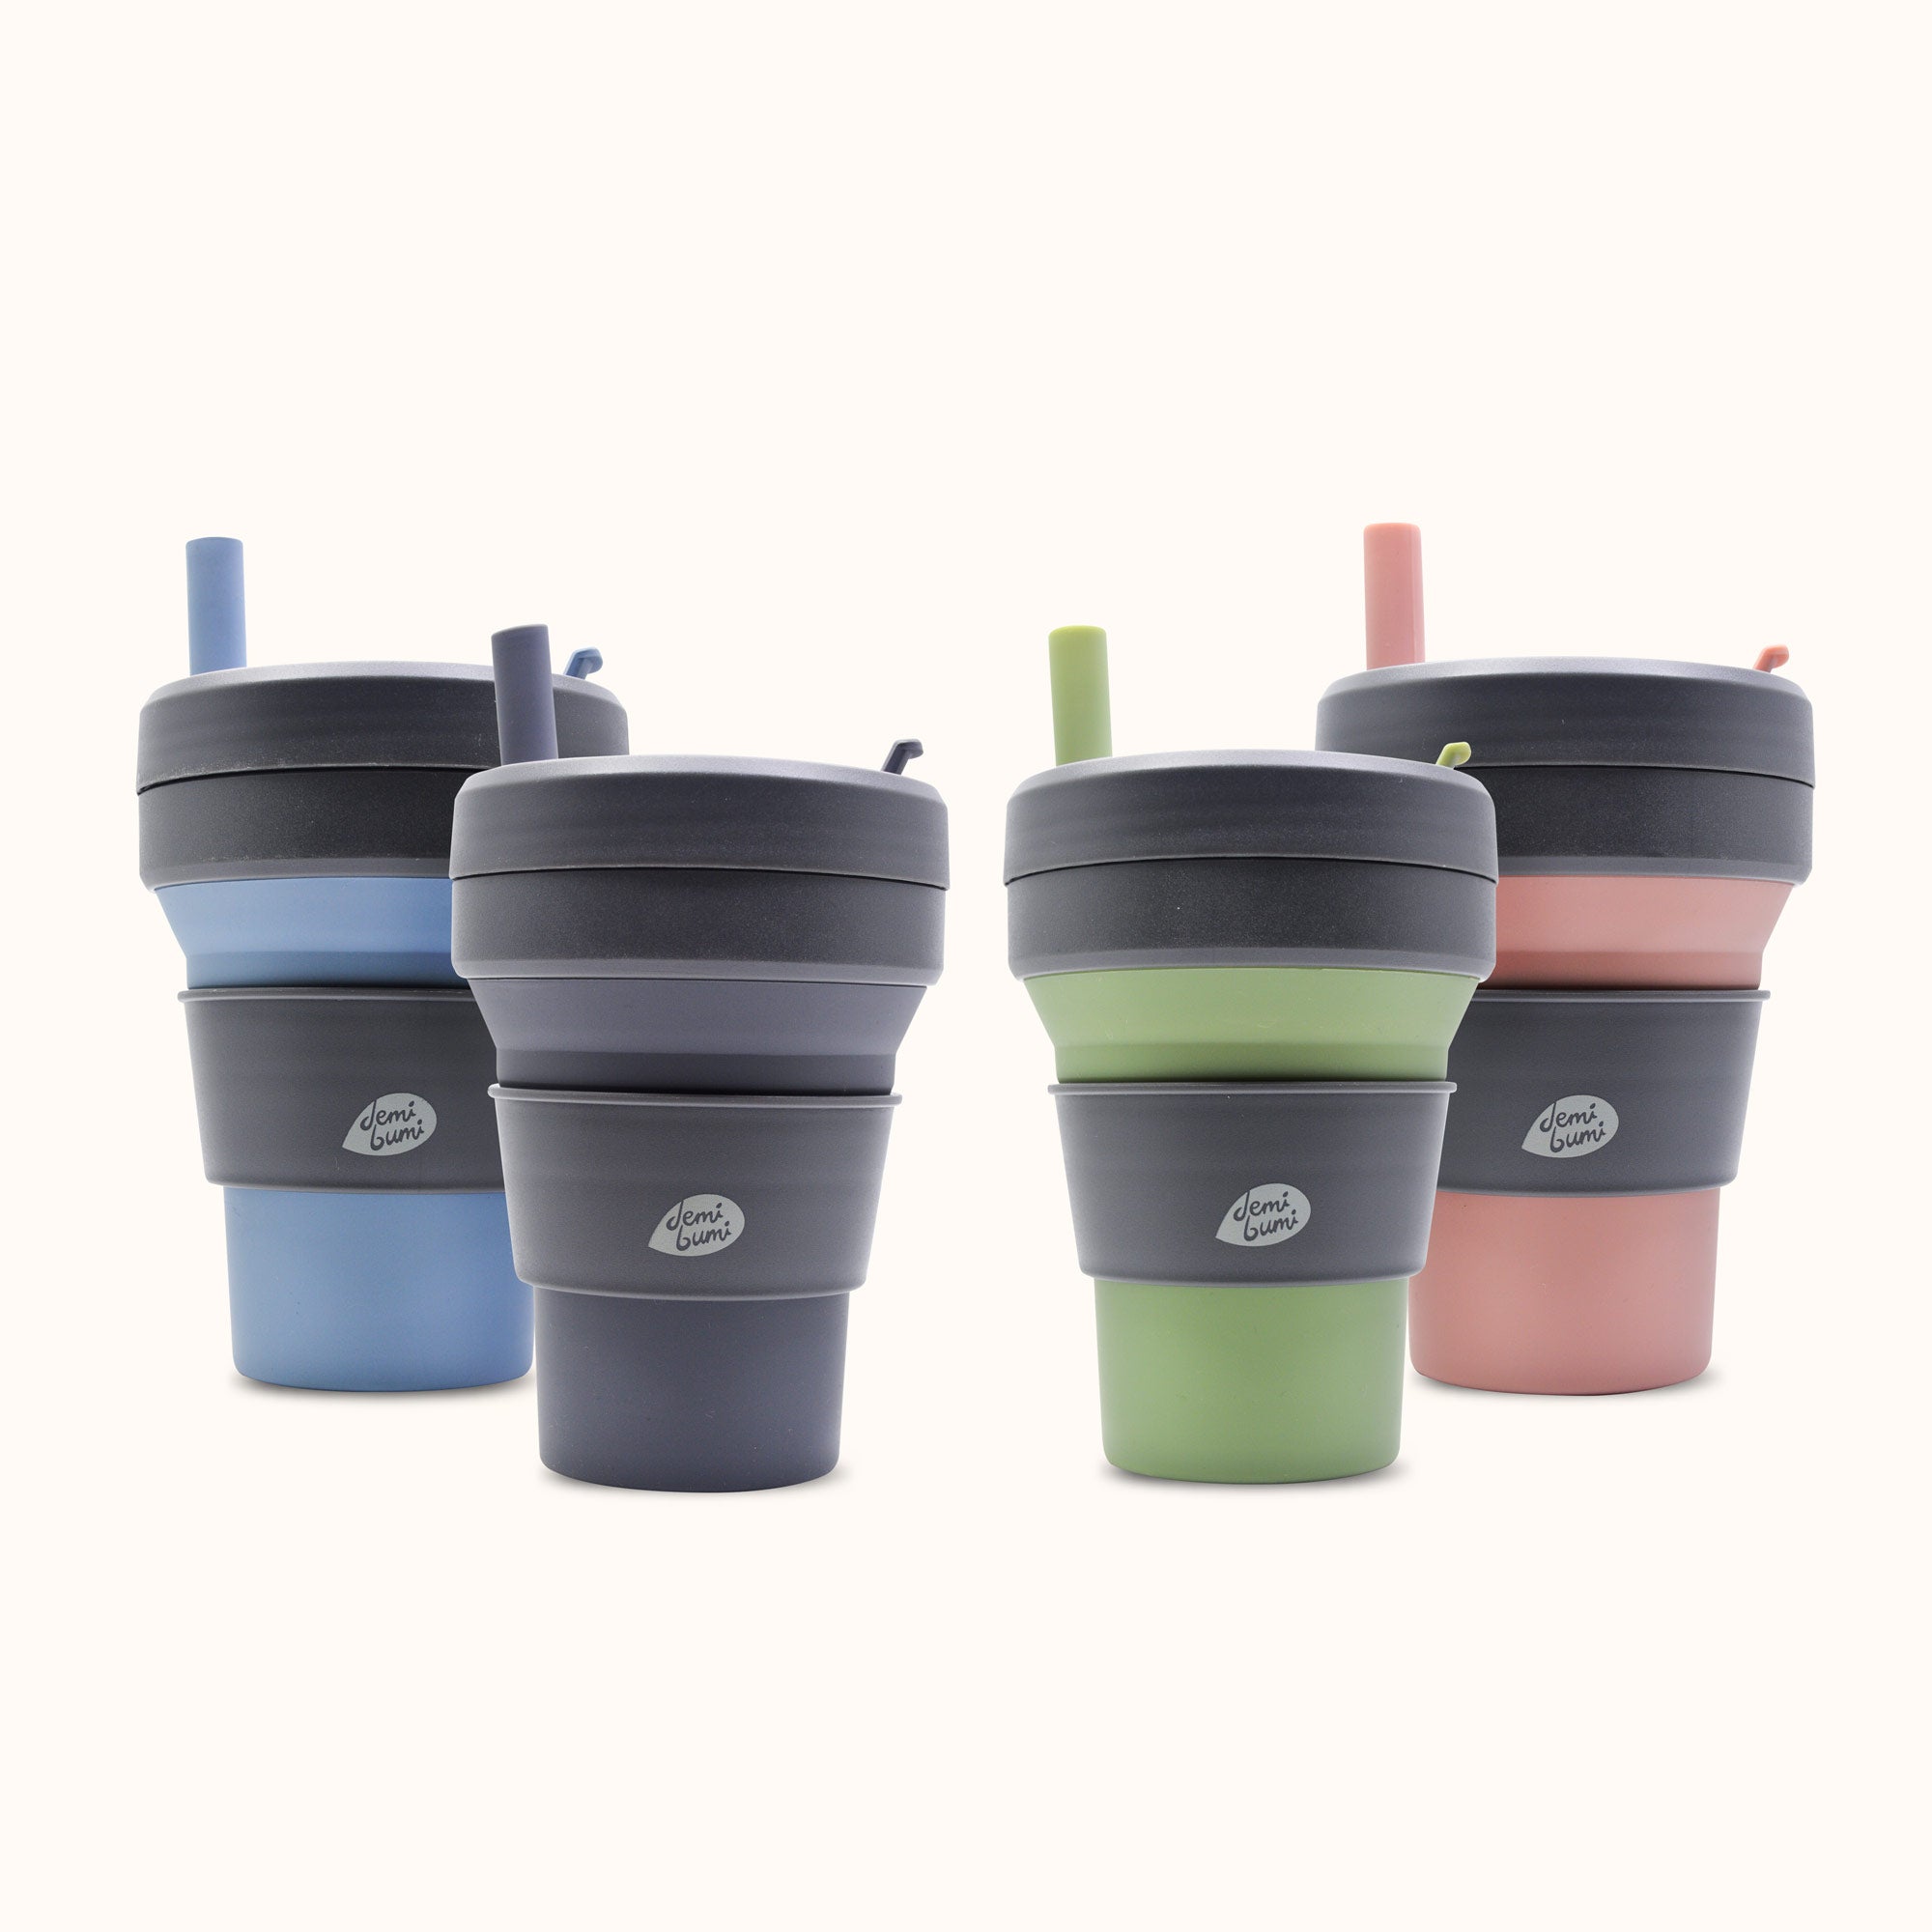 Demi Bumi Collapsible Silicone Cup | Kitchen Accessories | The Green Collective SG